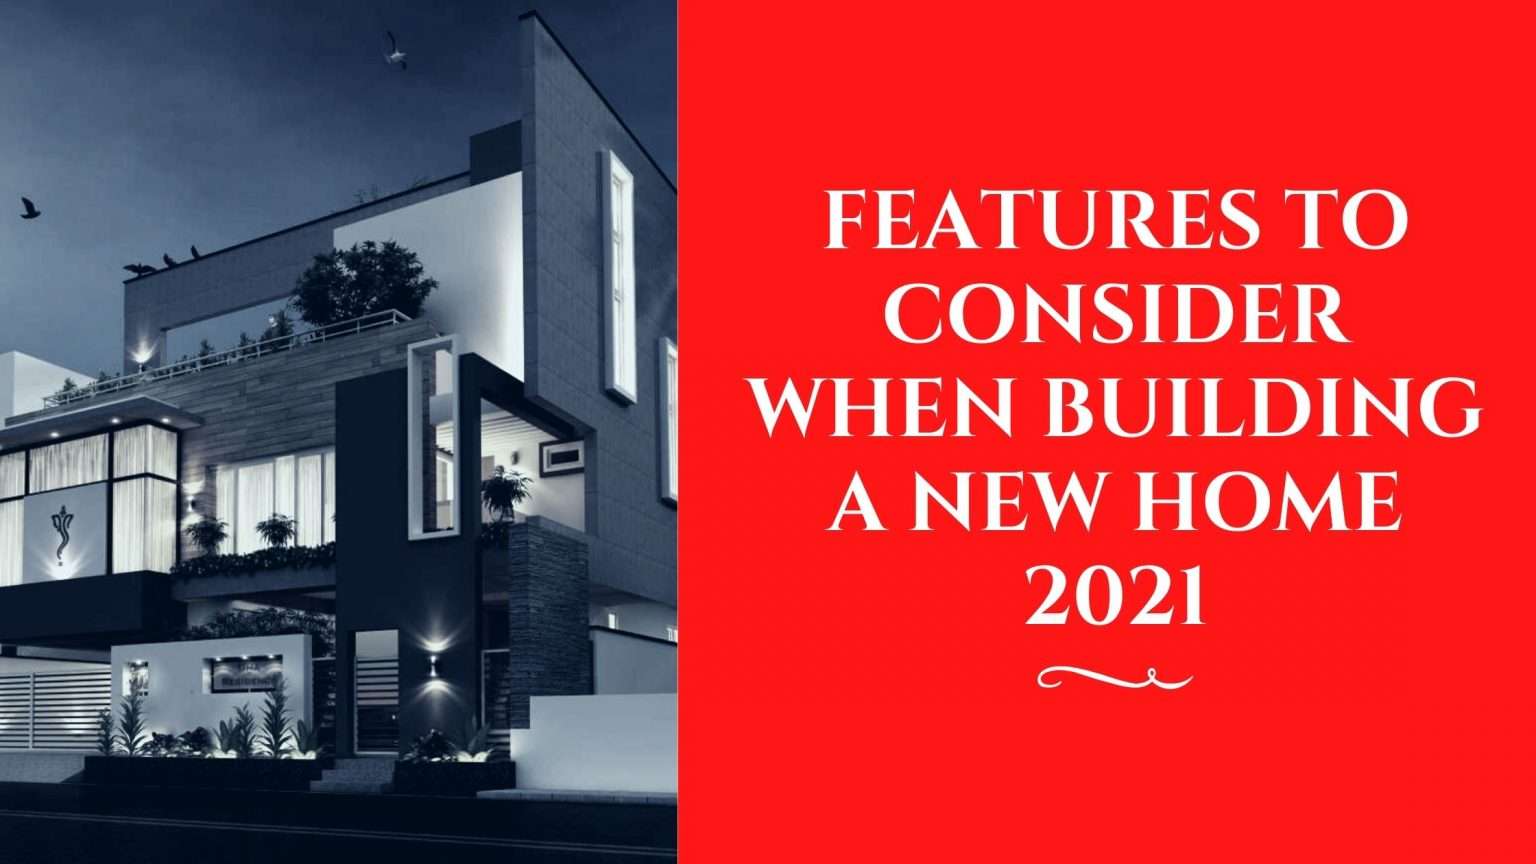 Top 7 Features To Consider When Building A New Home In 2021